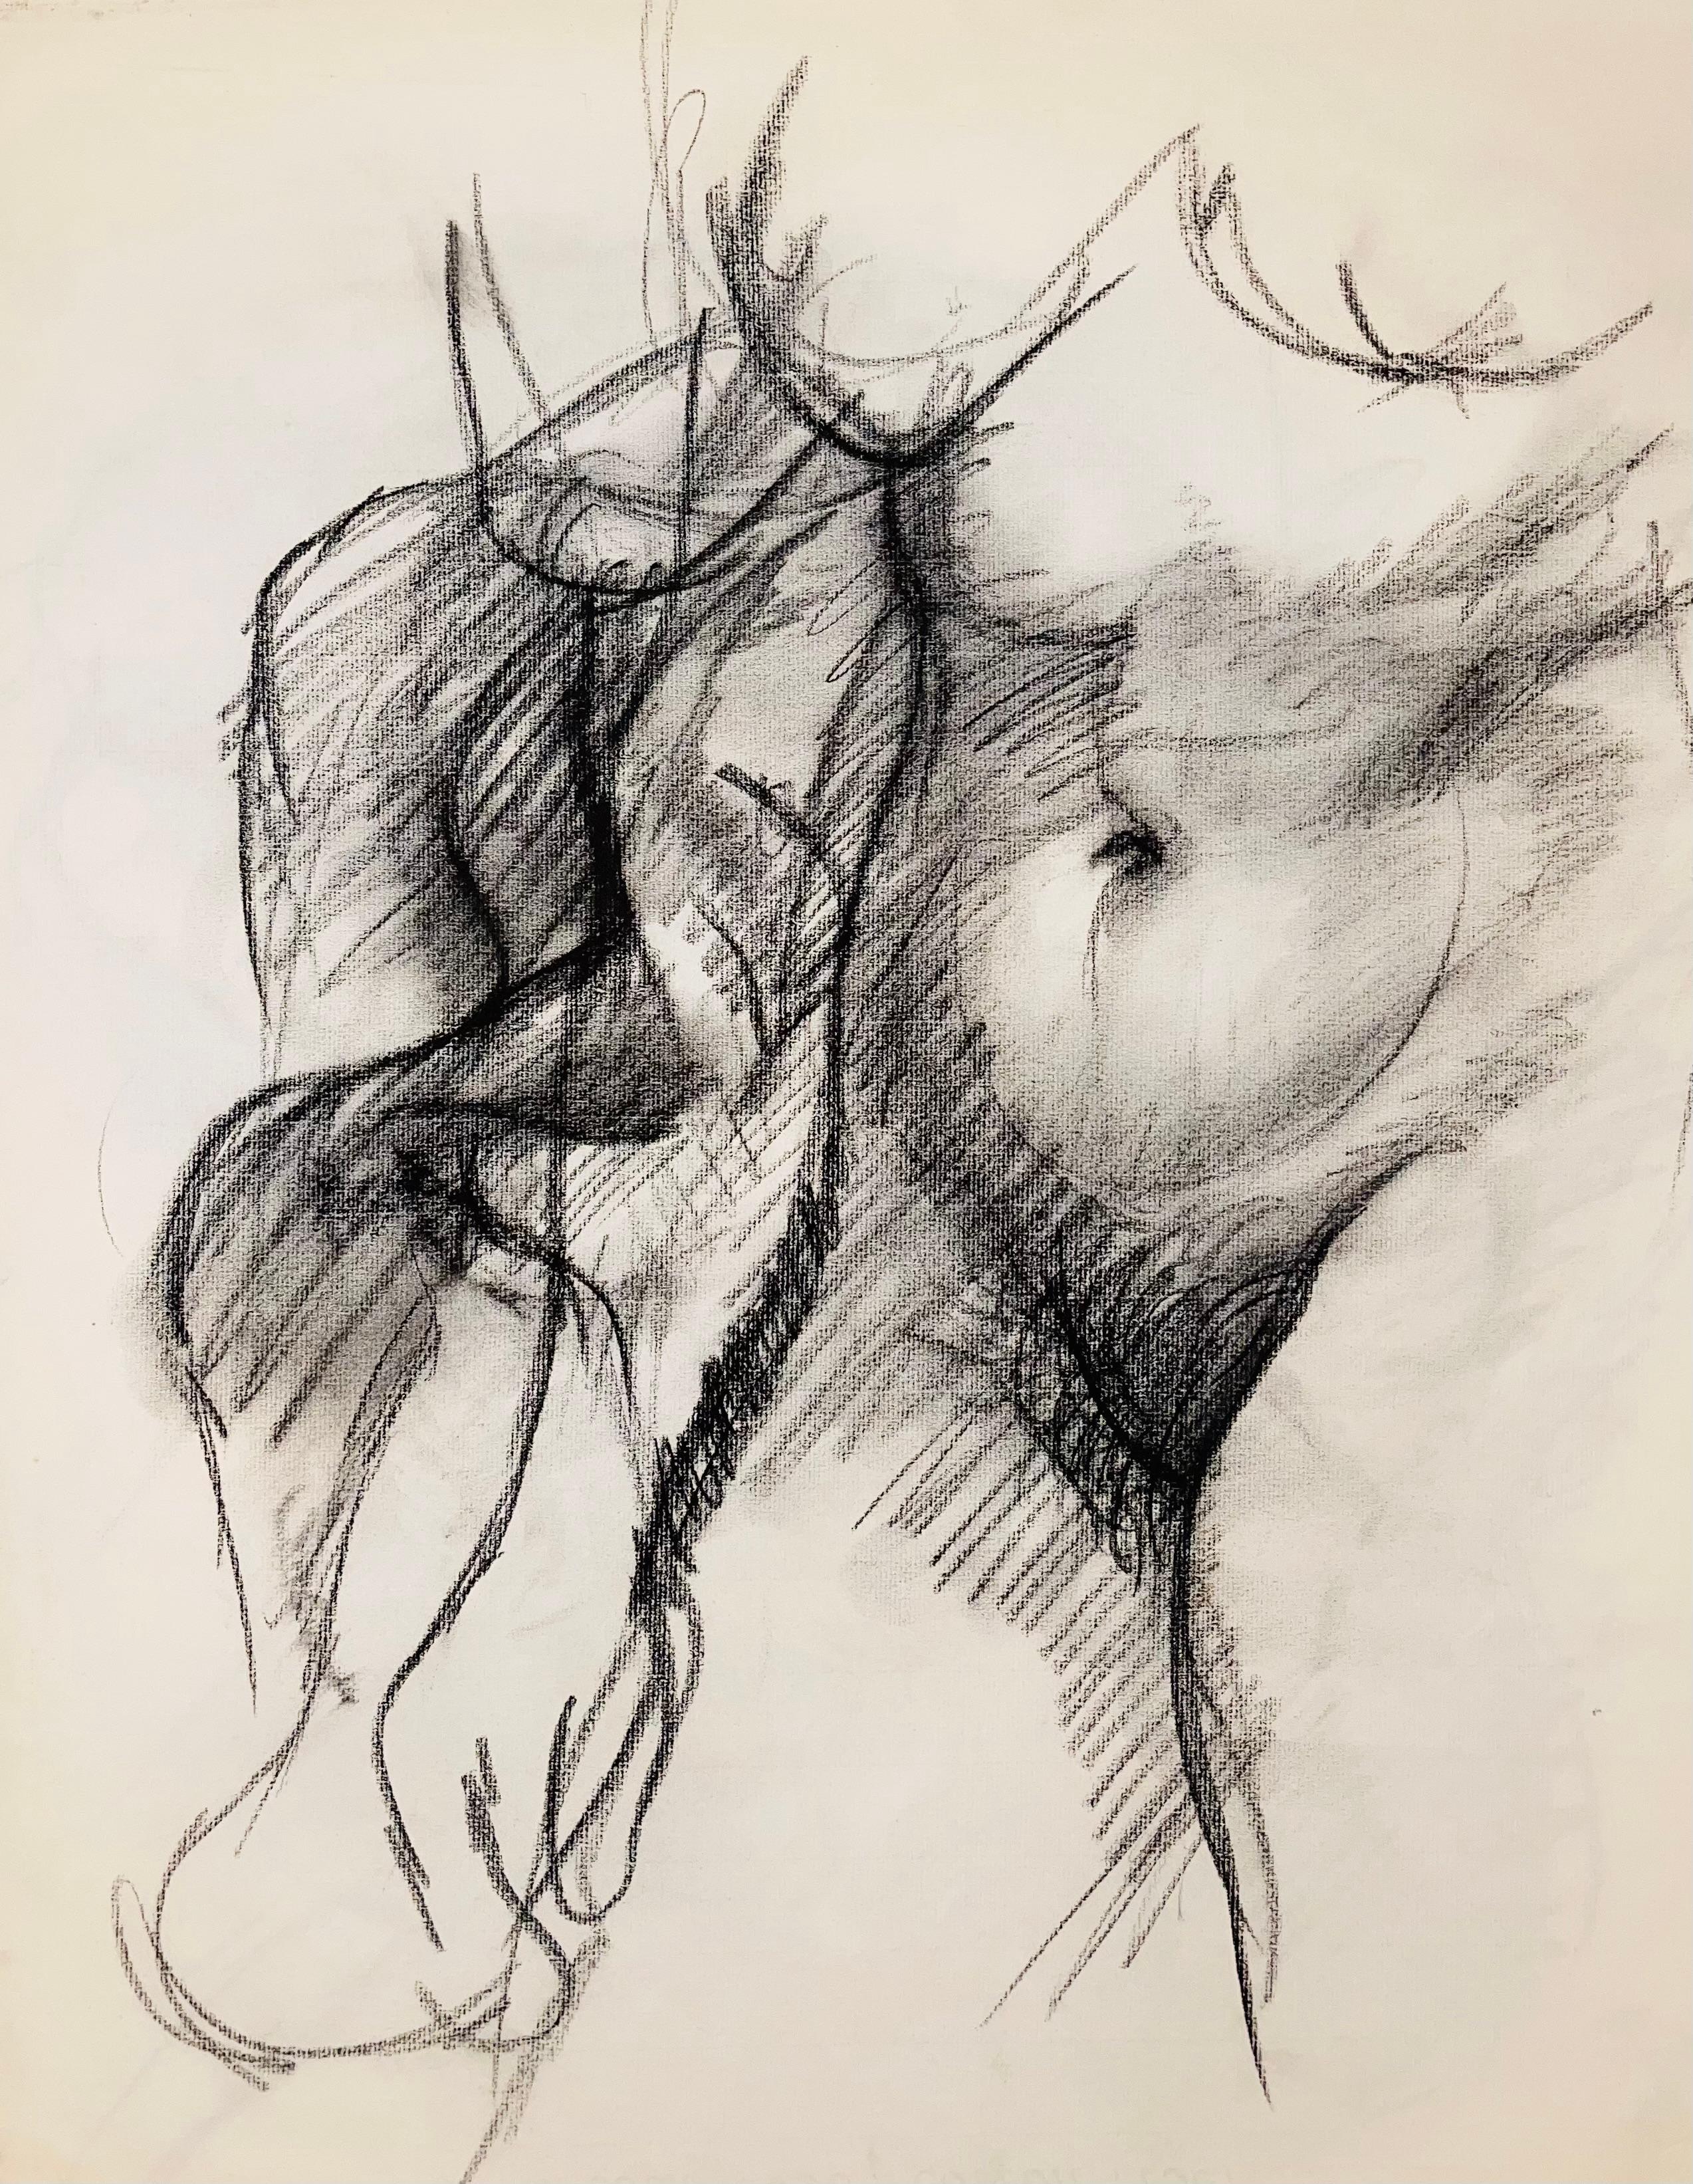 Original drawing on archival paper, circa 1963.  Paper Size: 18 x 23 inches. Provenance: Estate of Ian Hornak, East Hampton, New York. Notes: Created during Hornak’s undergraduate studies at Wayne State University in Detroit, Michigan.

IAN HORNAK